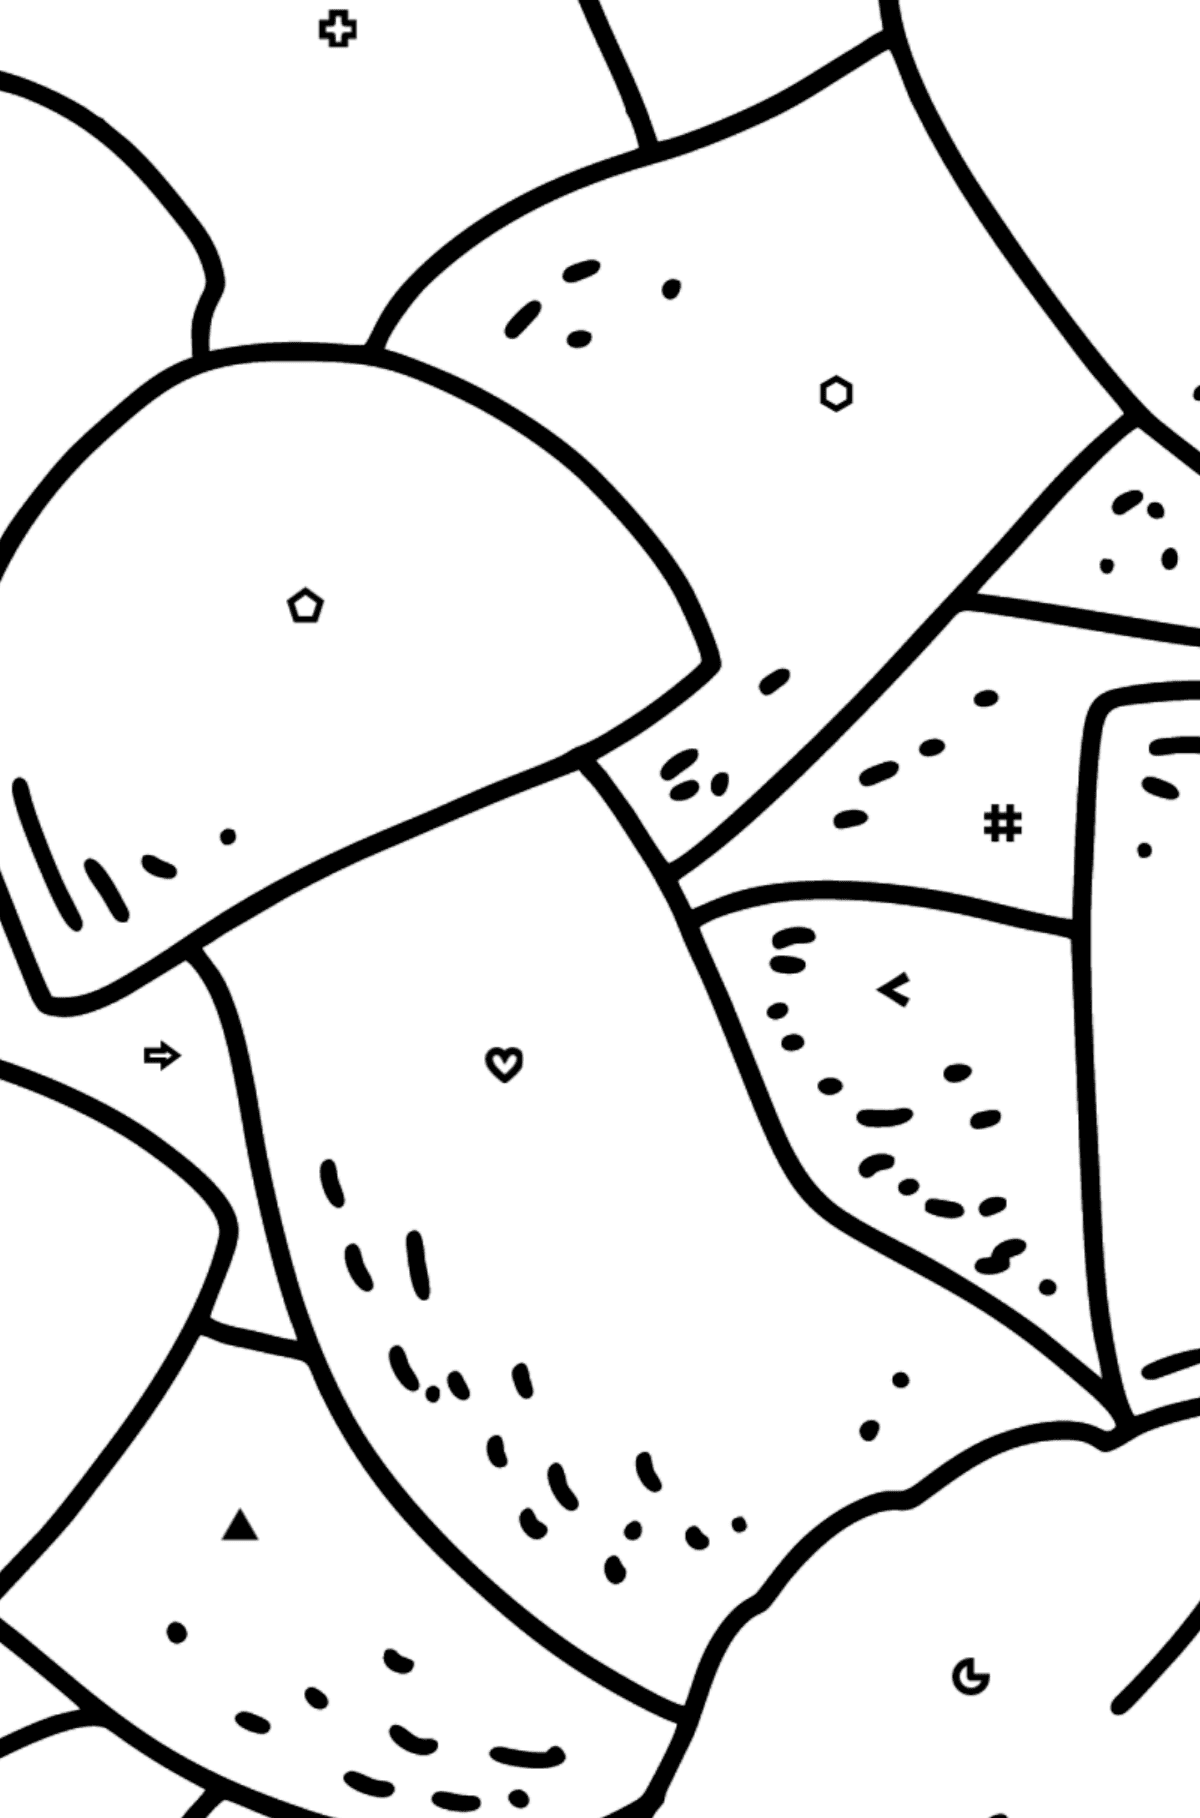 Boletus coloring page - Coloring by Symbols and Geometric Shapes for Kids